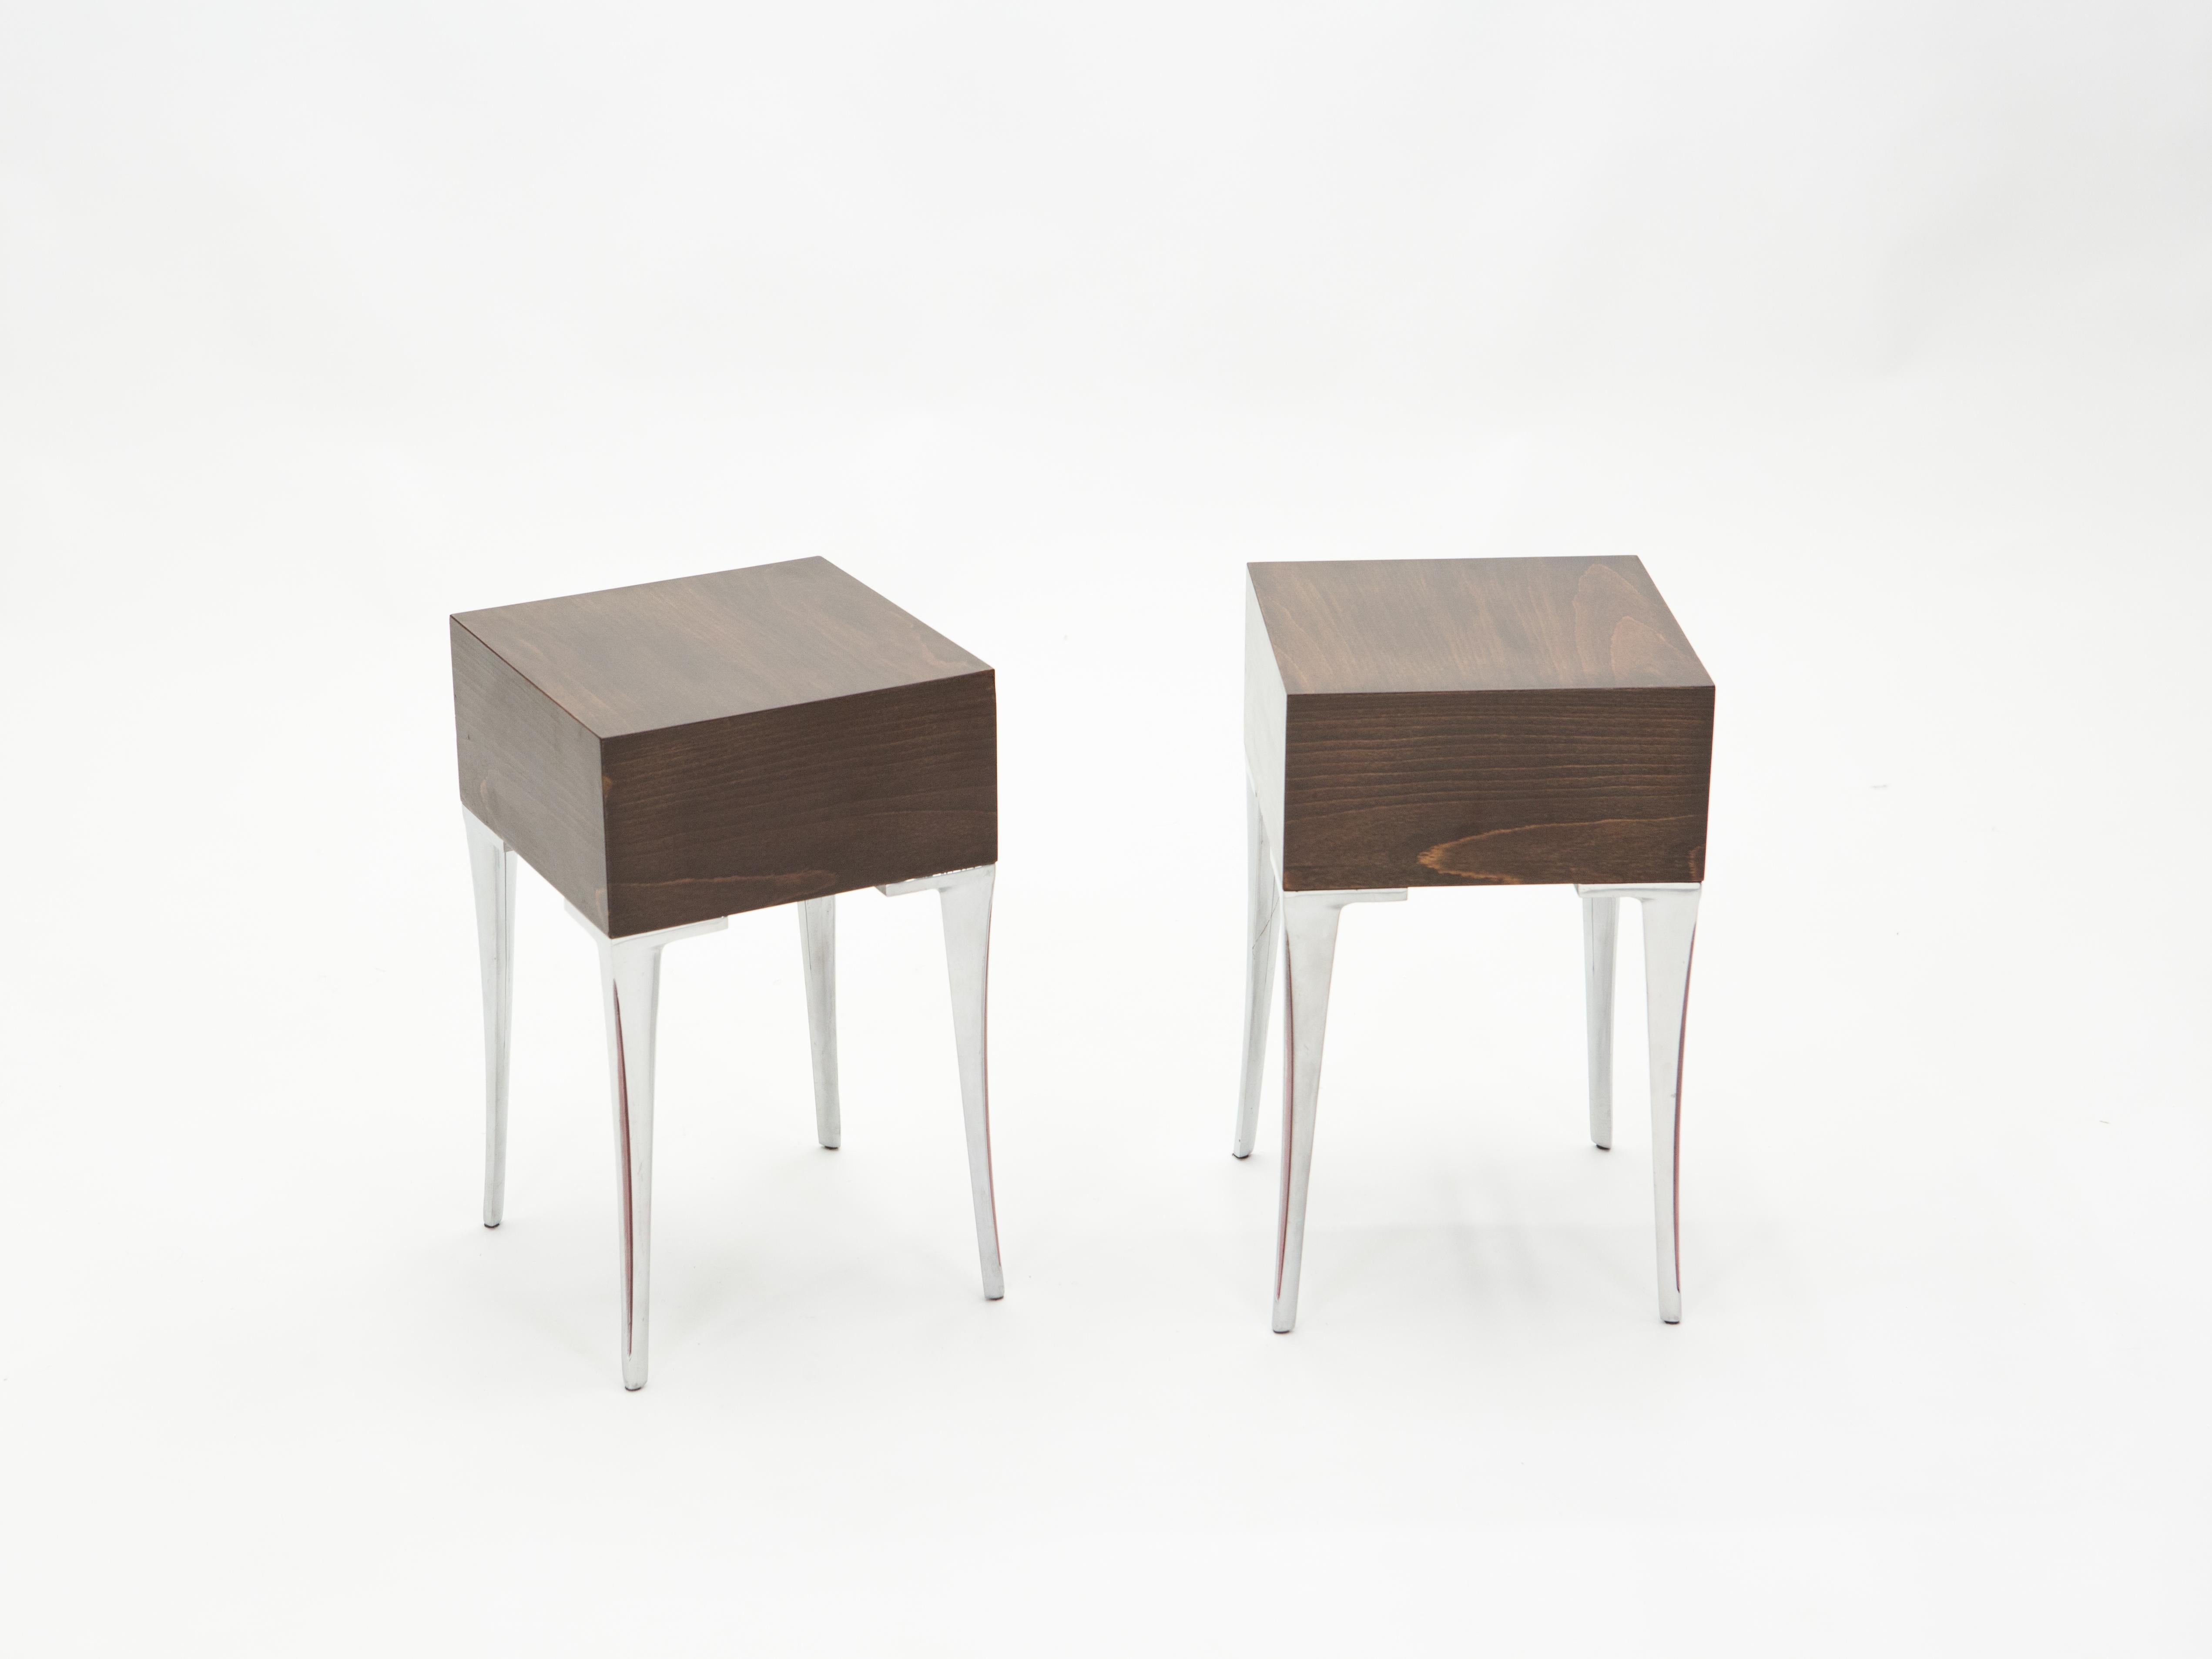 This pair of lined and elegant end tables or bedside tables is made from ebony veneer wood, with beautiful steel feet, in the early 1970s. Vintage and sophisticated, typically 1970s vibe, they feature a boxy square top with sinuous saber legs with